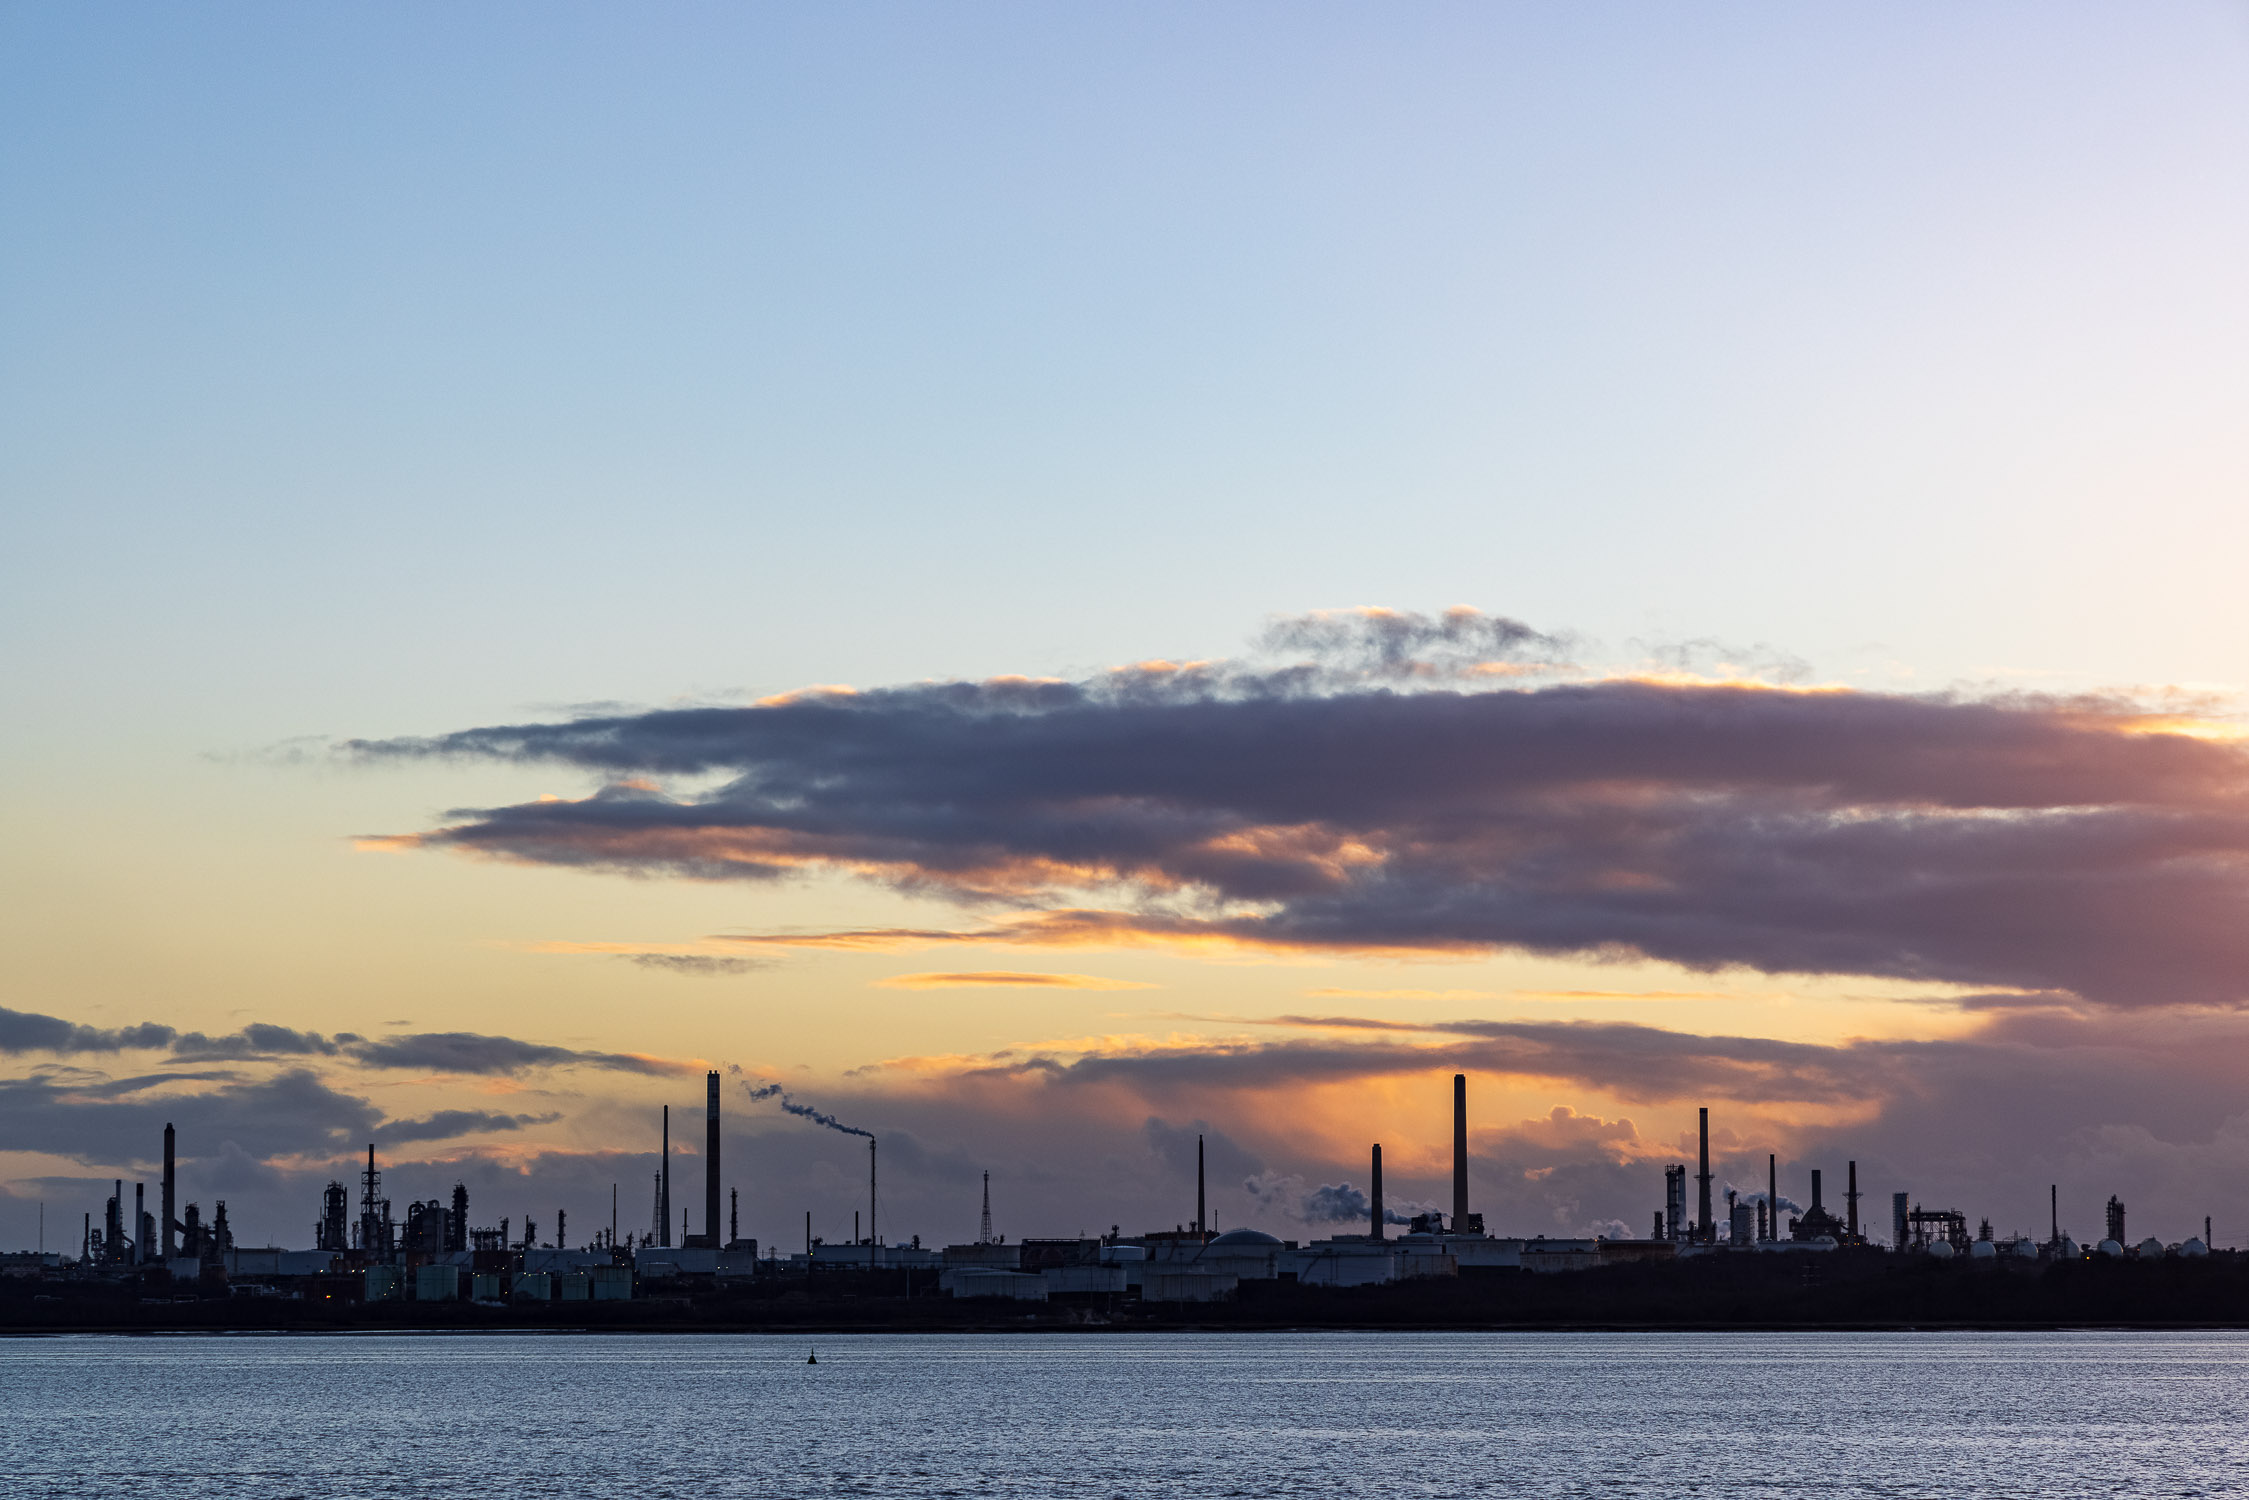 Sunset behind the Fawley oil refinery